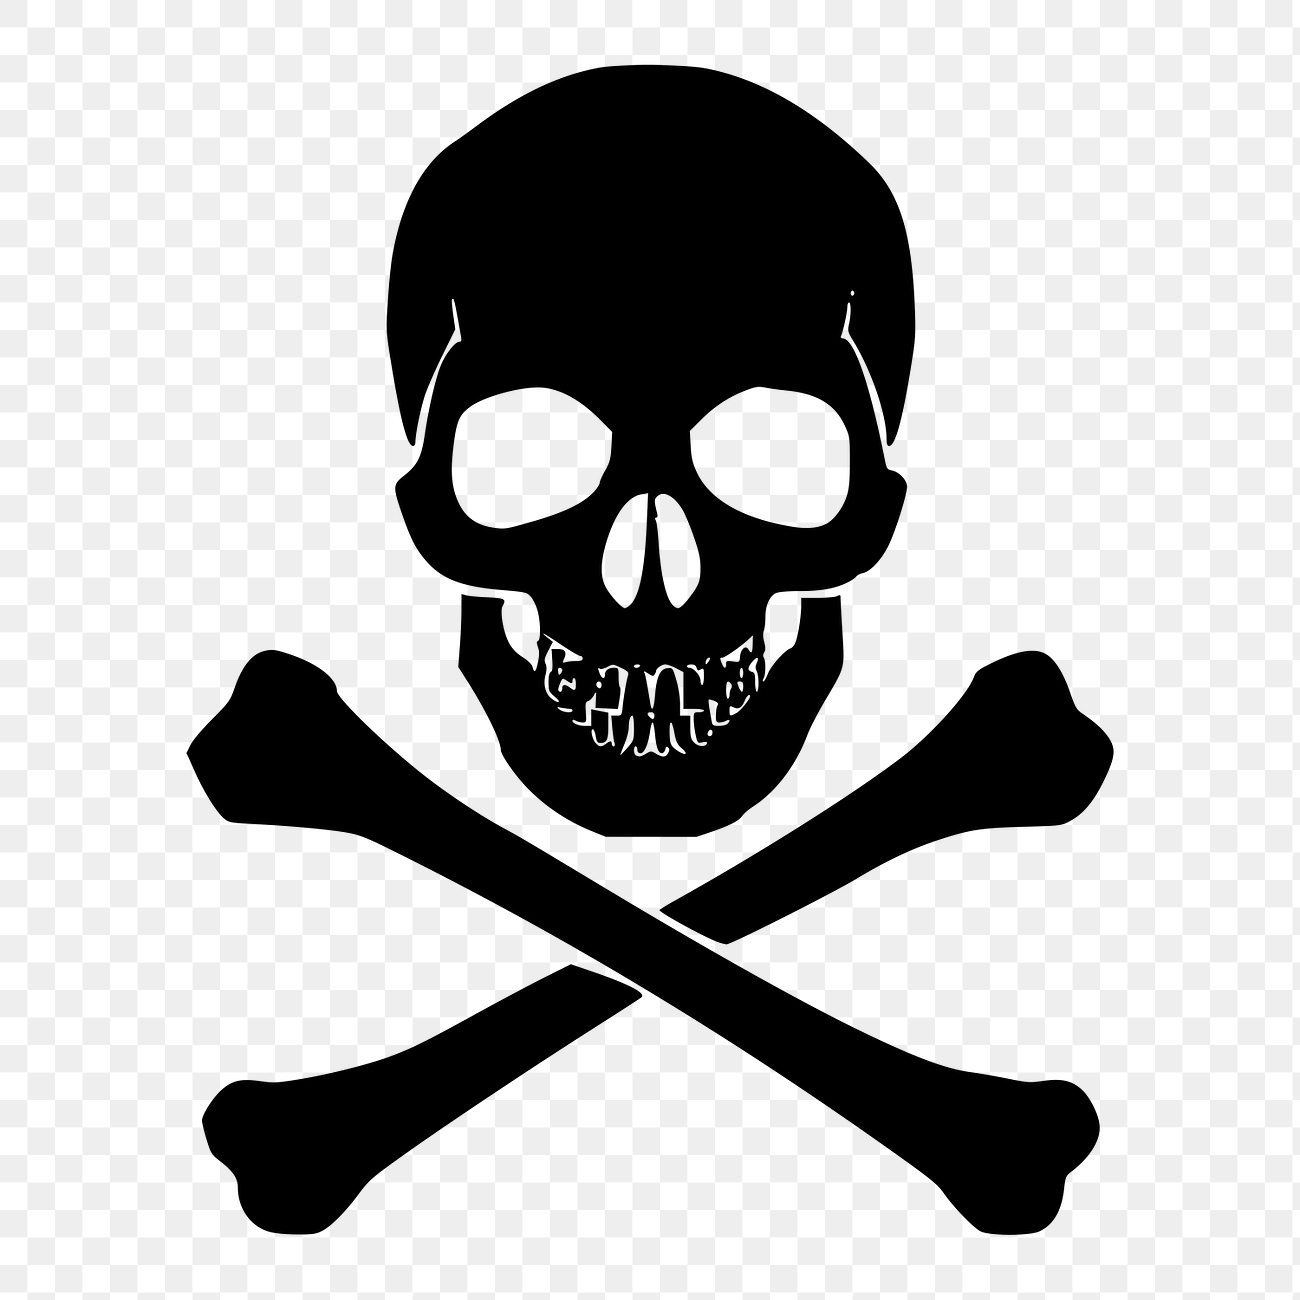 Pirate skull png sticker, silhouette | Free PNG - rawpixel